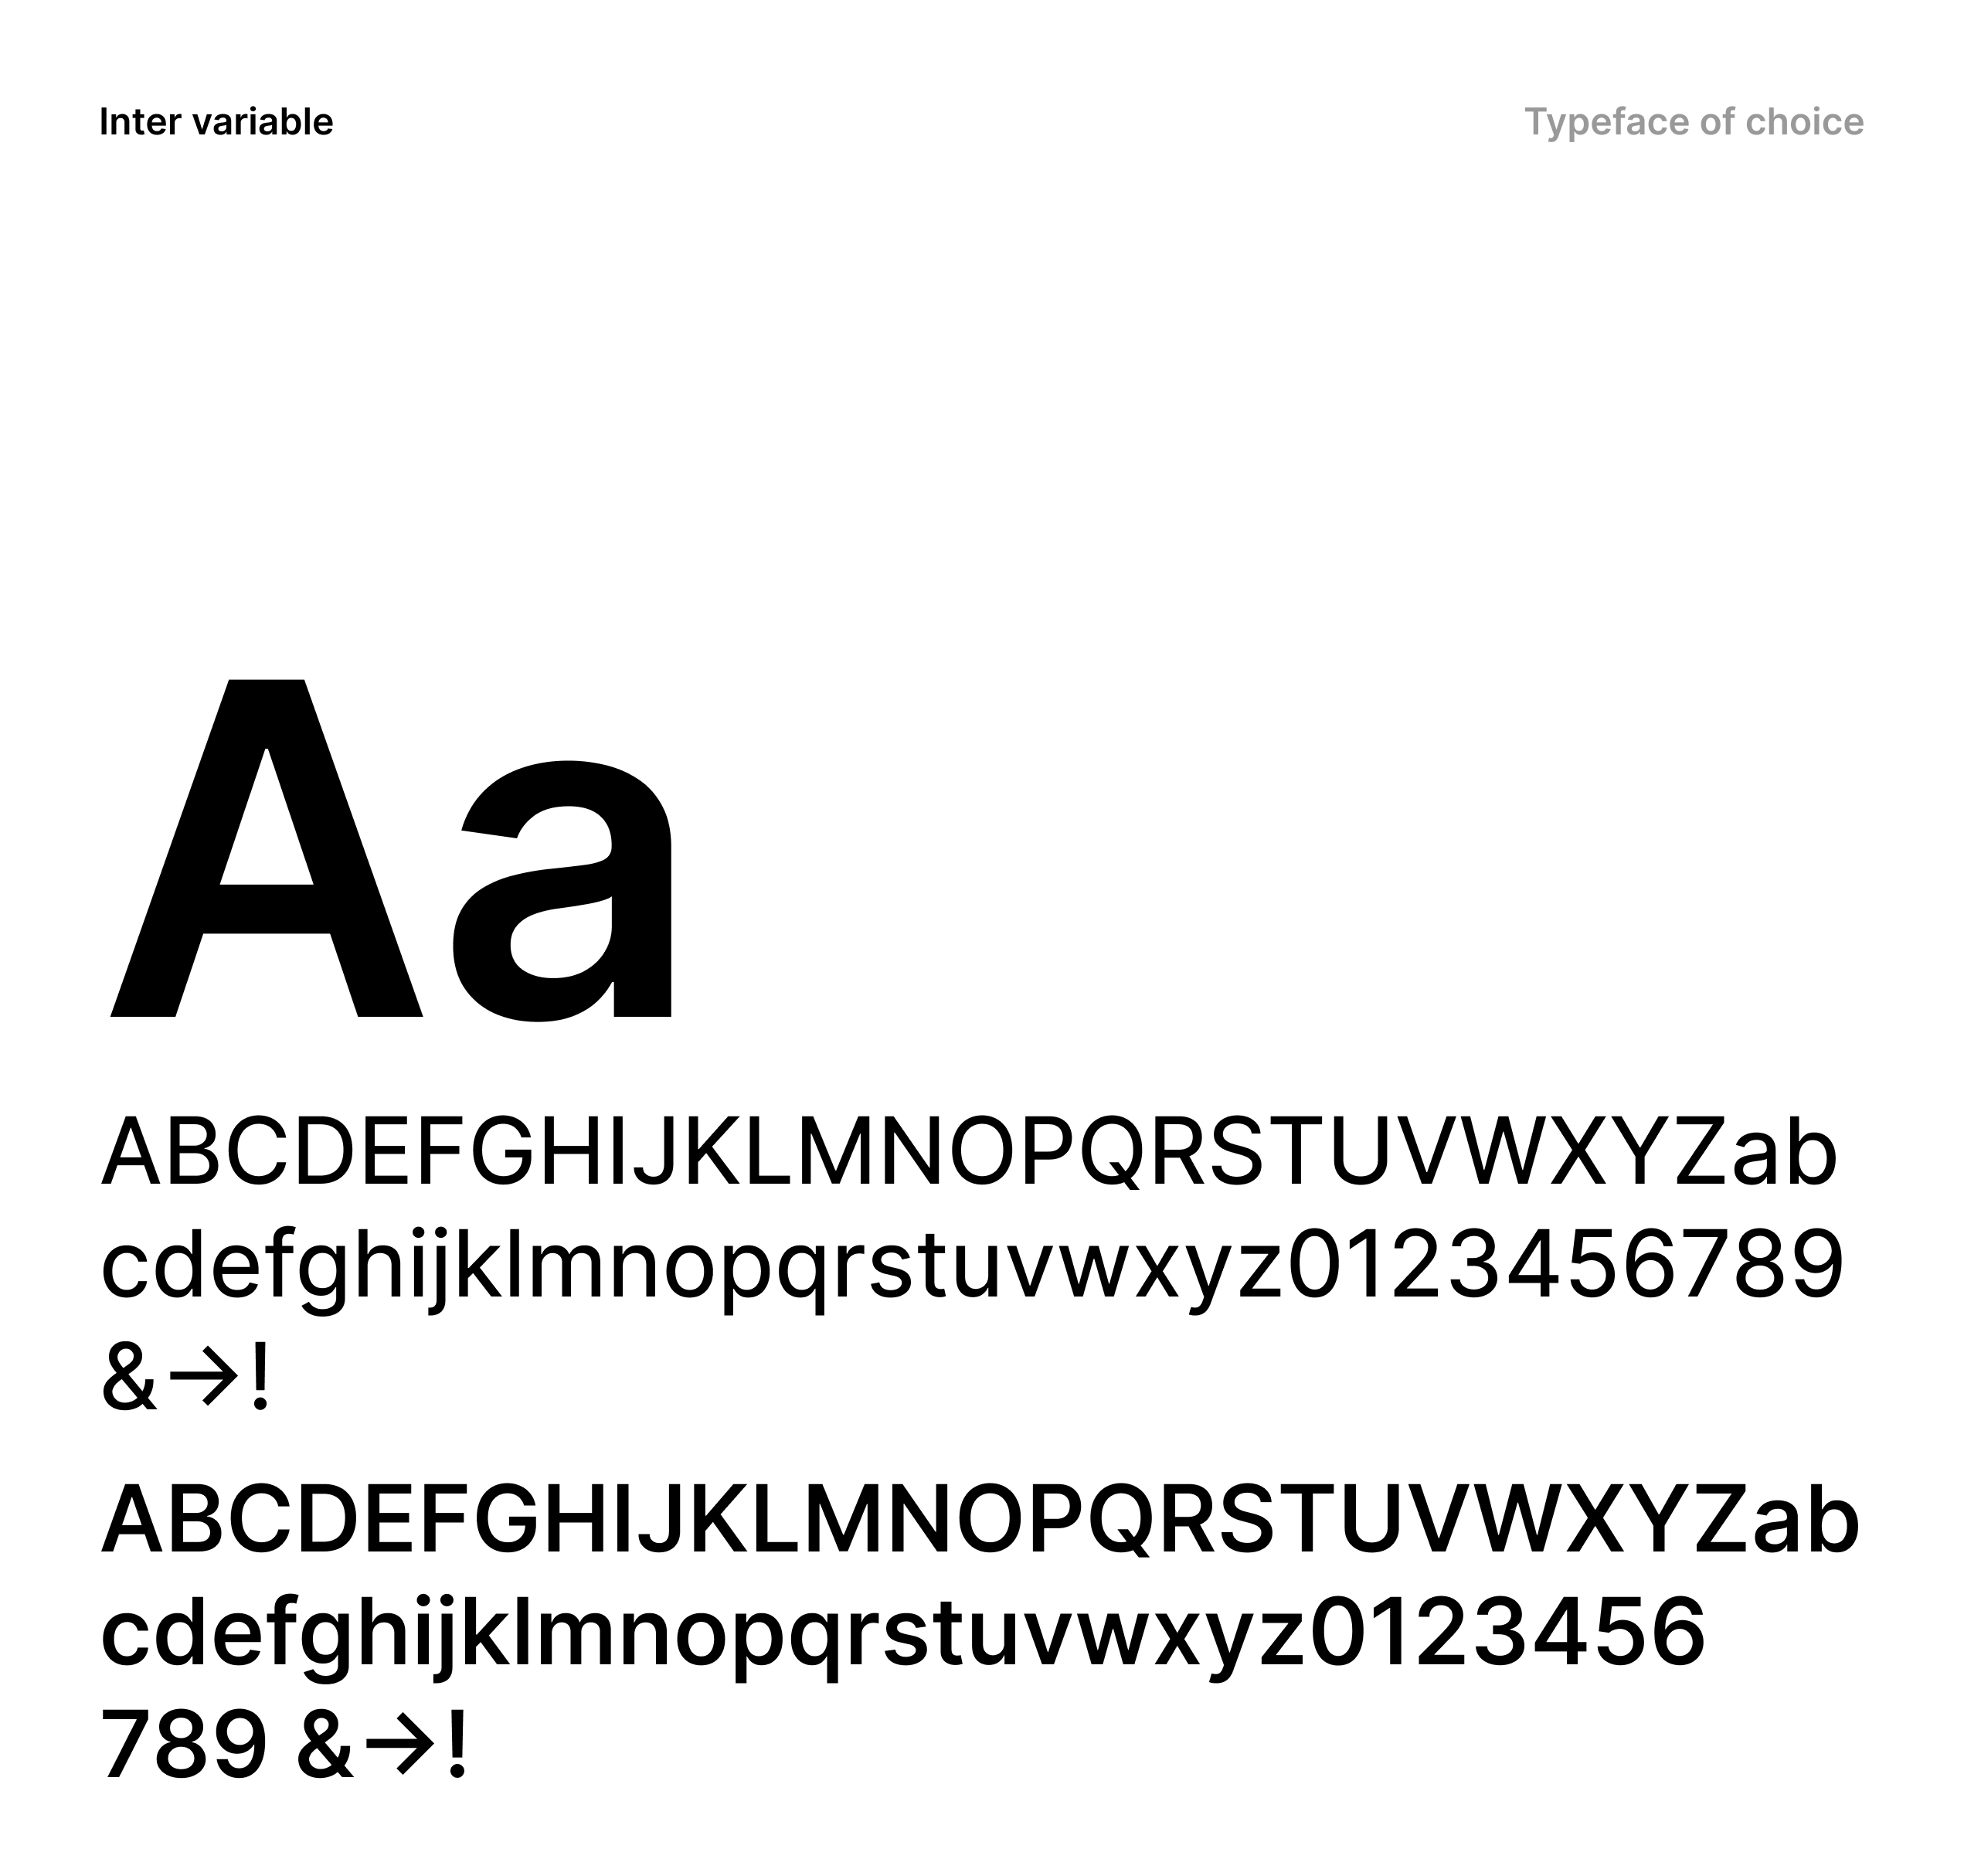 Presentation of font Inter with example glyphs